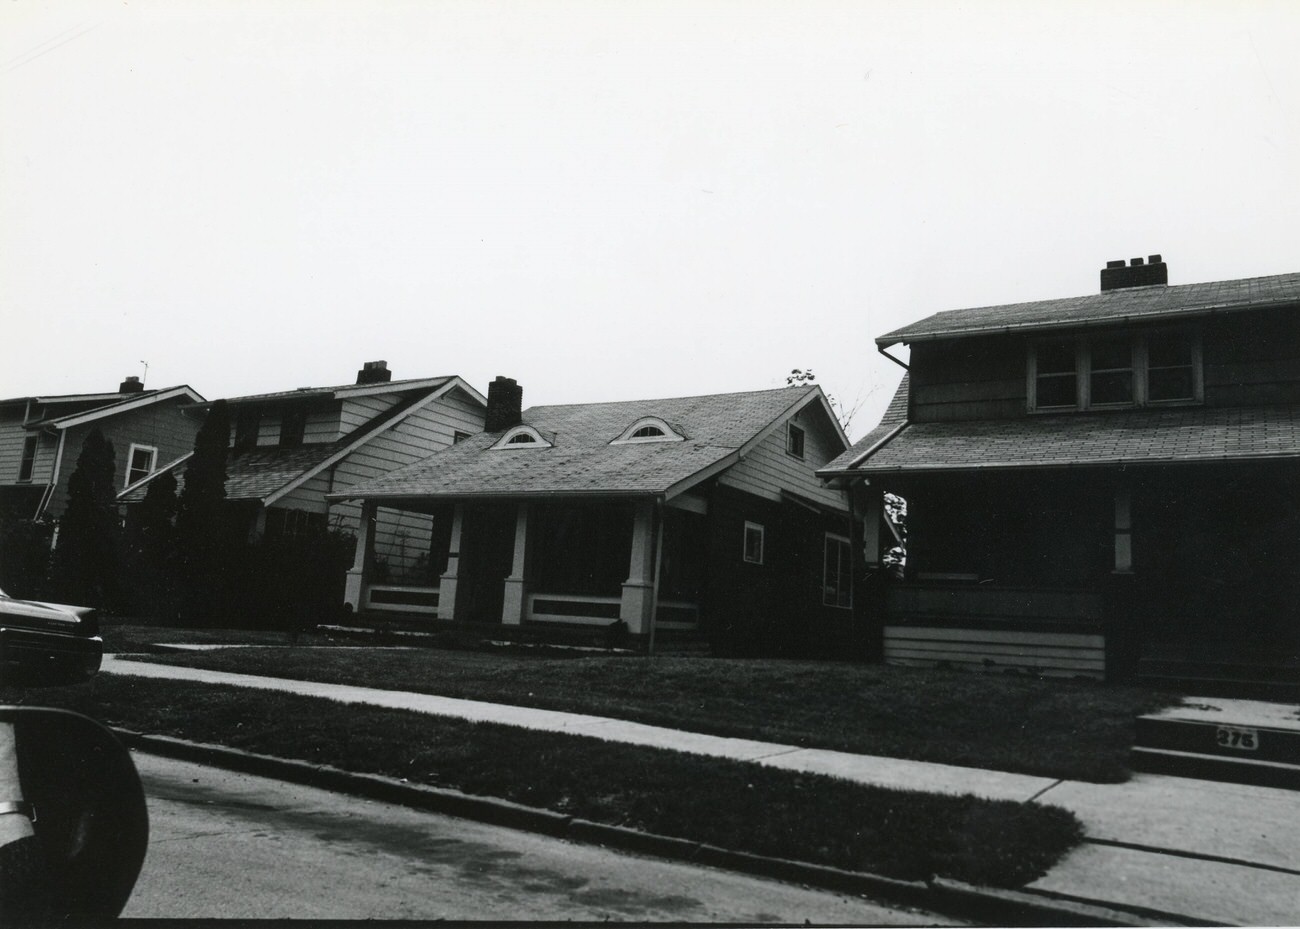 275 Columbian Avenue, included in the Greater Hilltop Area Commission's Hilltop U.S.A. guide, 1980s.